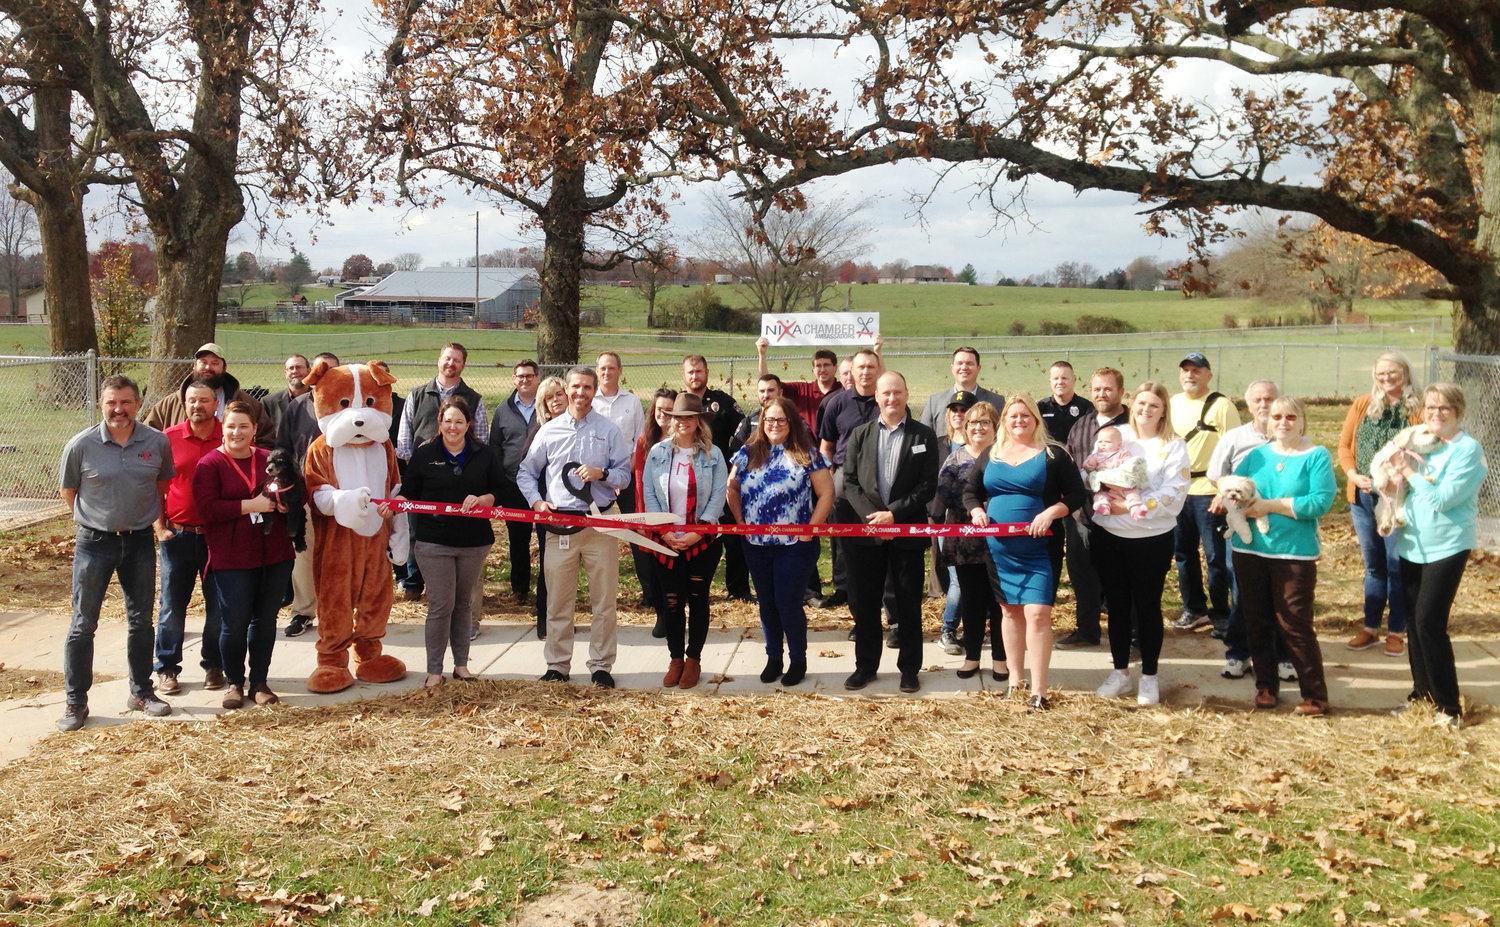 THE NIXA CHAMBER OF COMMERCE held a ceremonial ribbon cutting for the grand opening of the Nixa Dog Park on Nov. 17, 2021. Members of the Nixa Department of Parks and Recreation staff hosted business leaders from Nixa to celebrate the park’s opening.